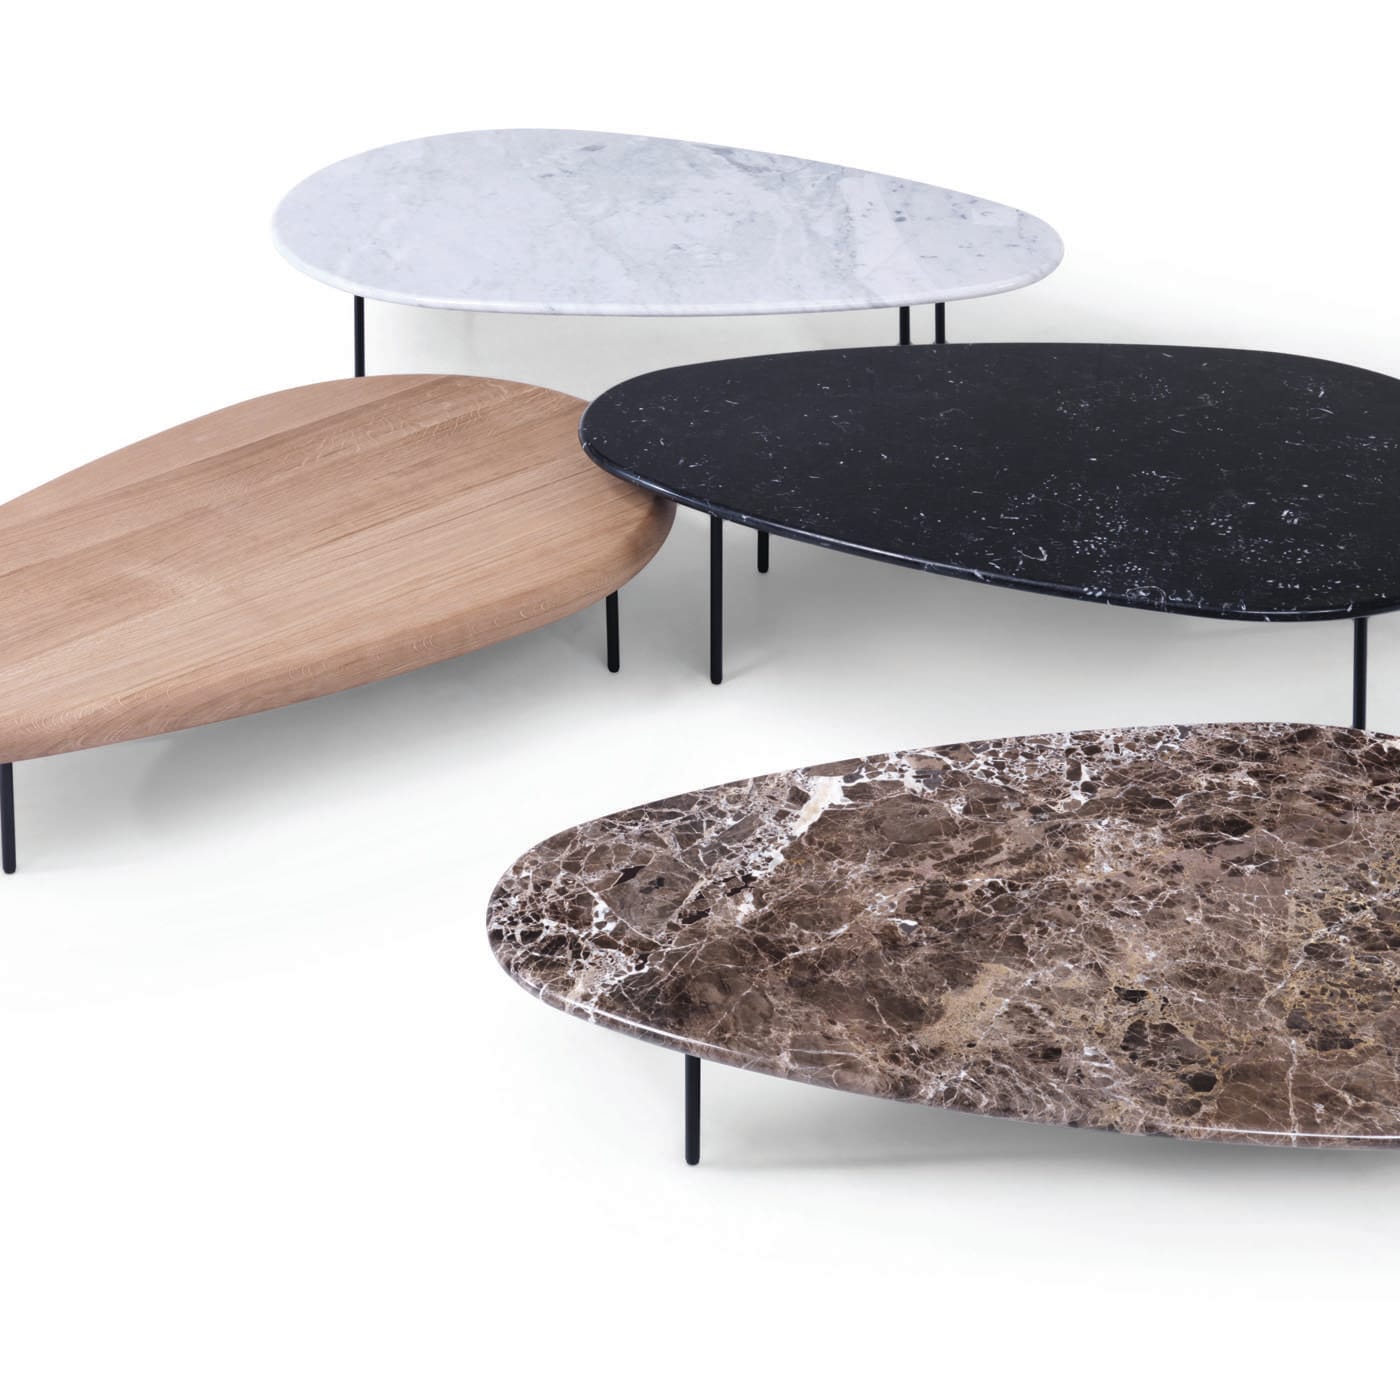 Lily Oak Wood Coffee Table by Marc Thorpe - Casamania